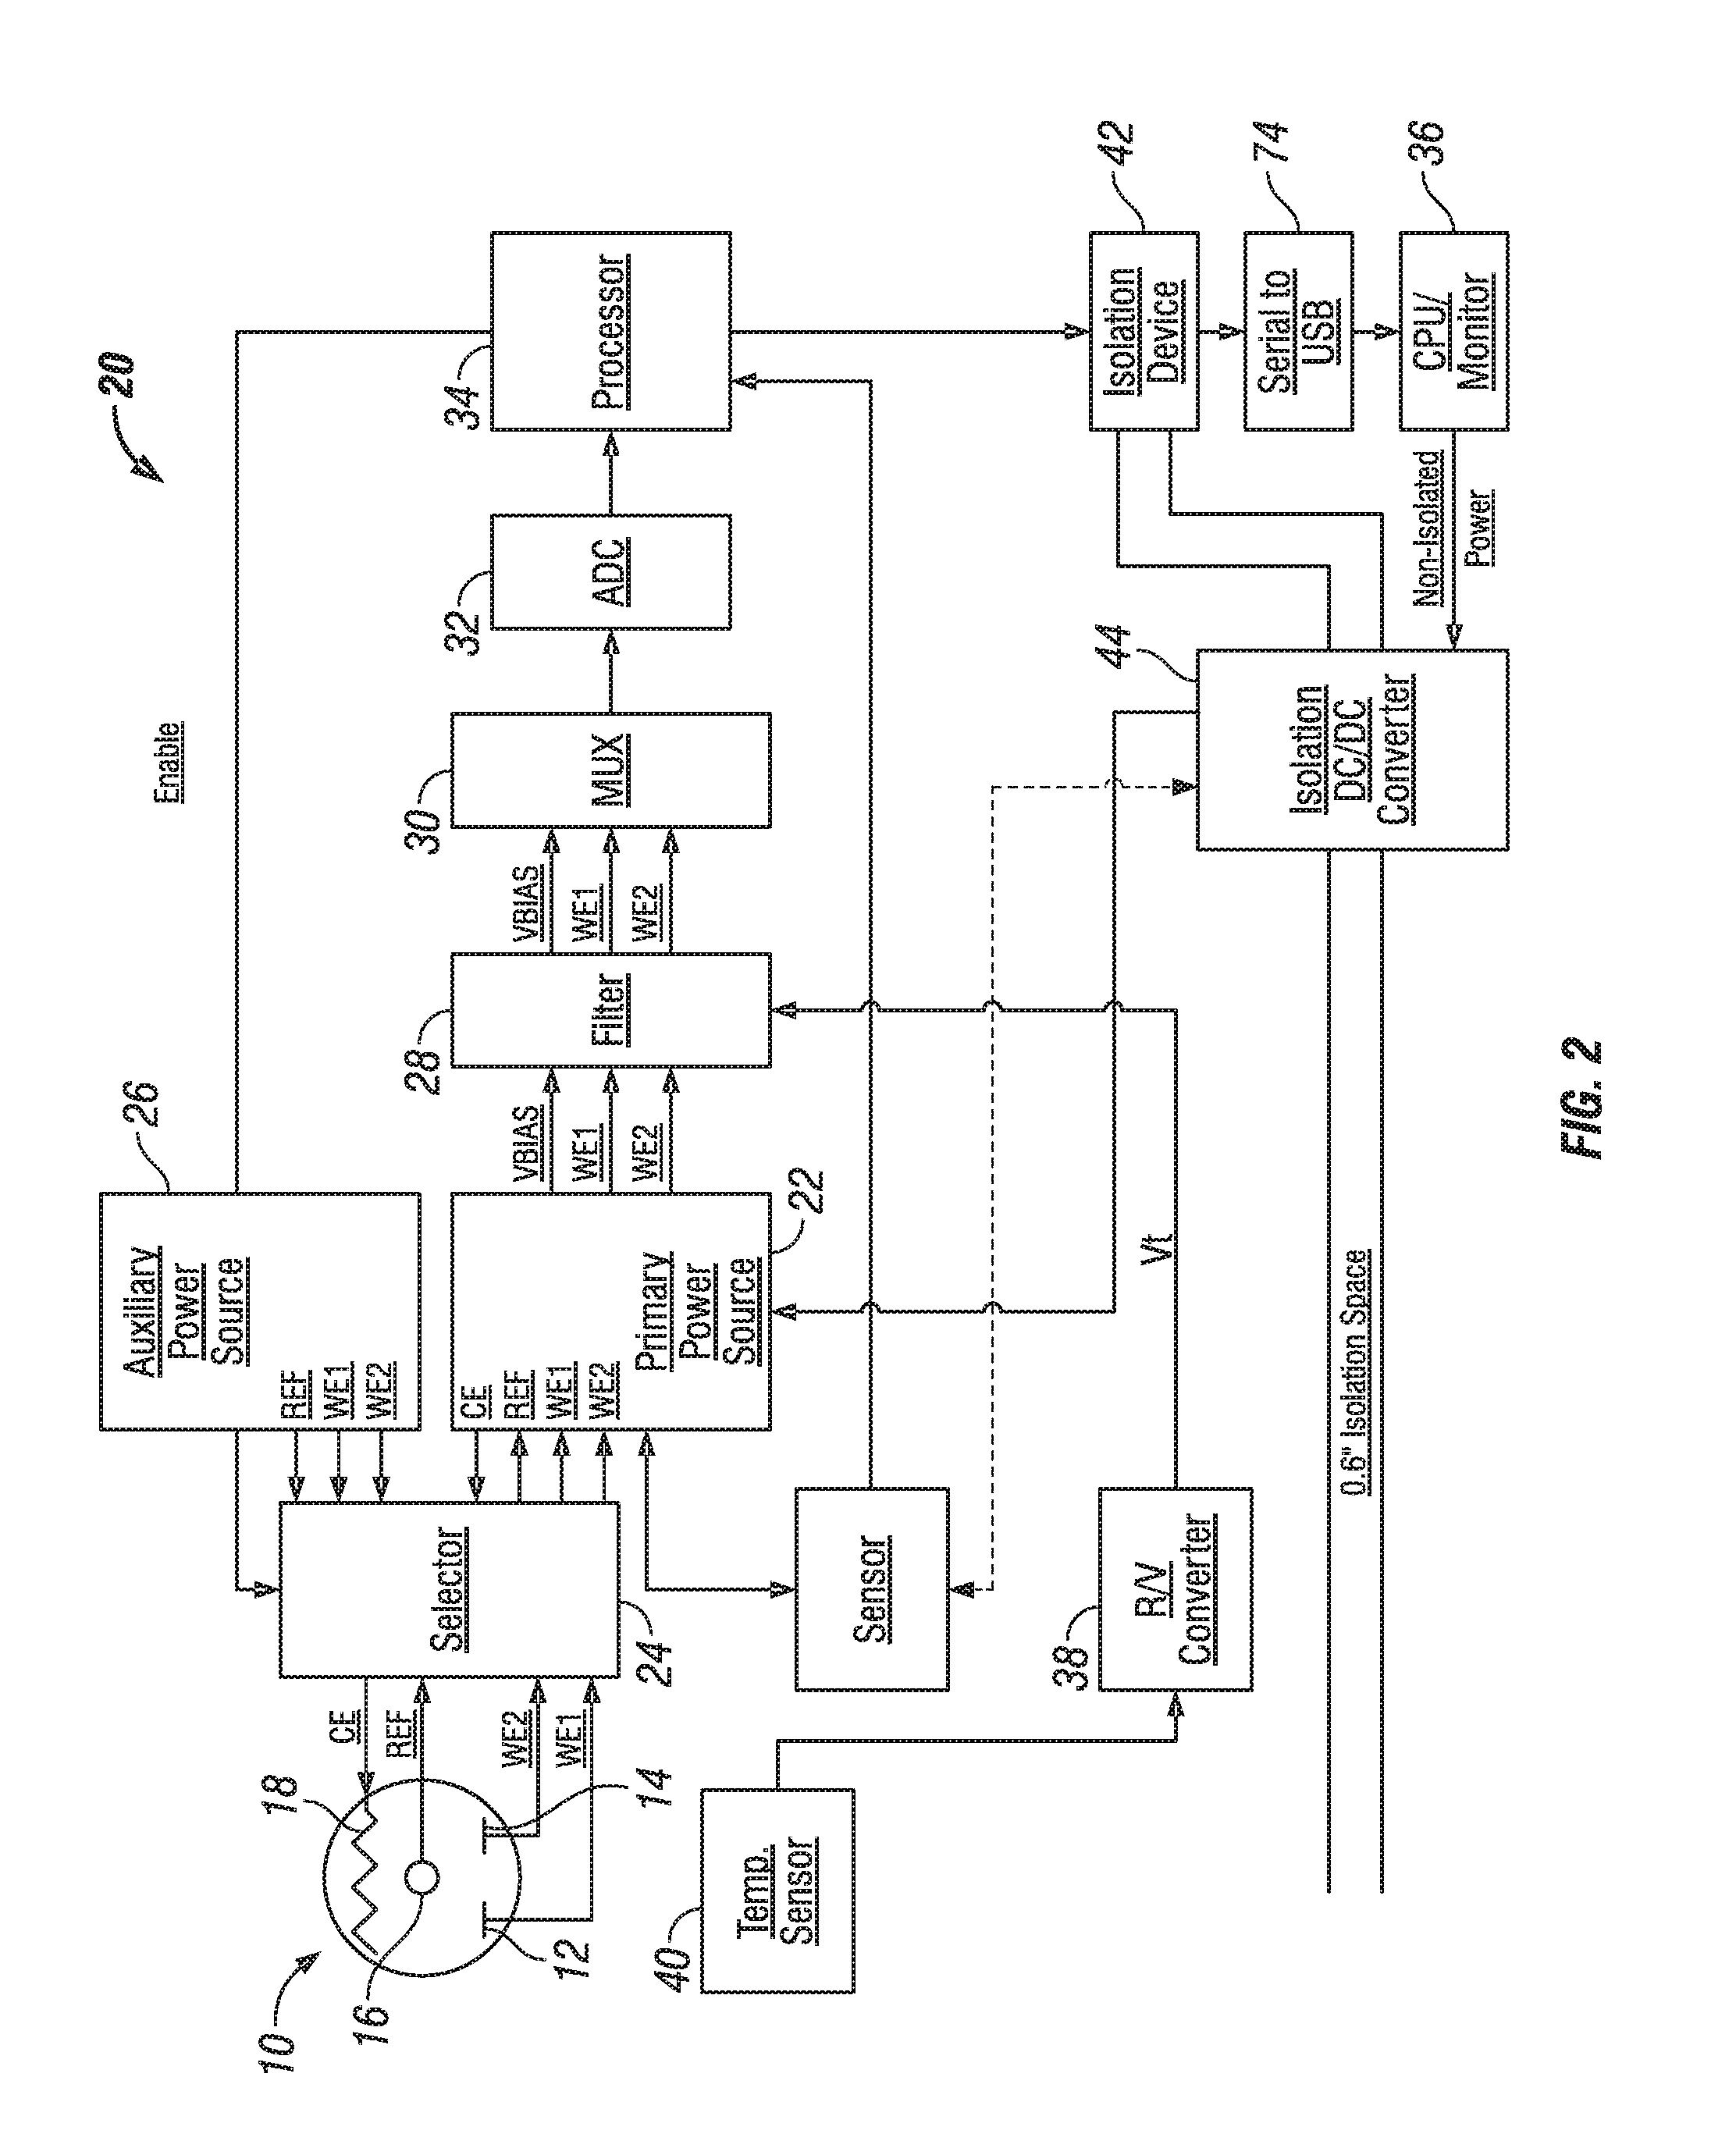 Analyte monitoring system having back-up power source for use in either transport of the system or primary power loss